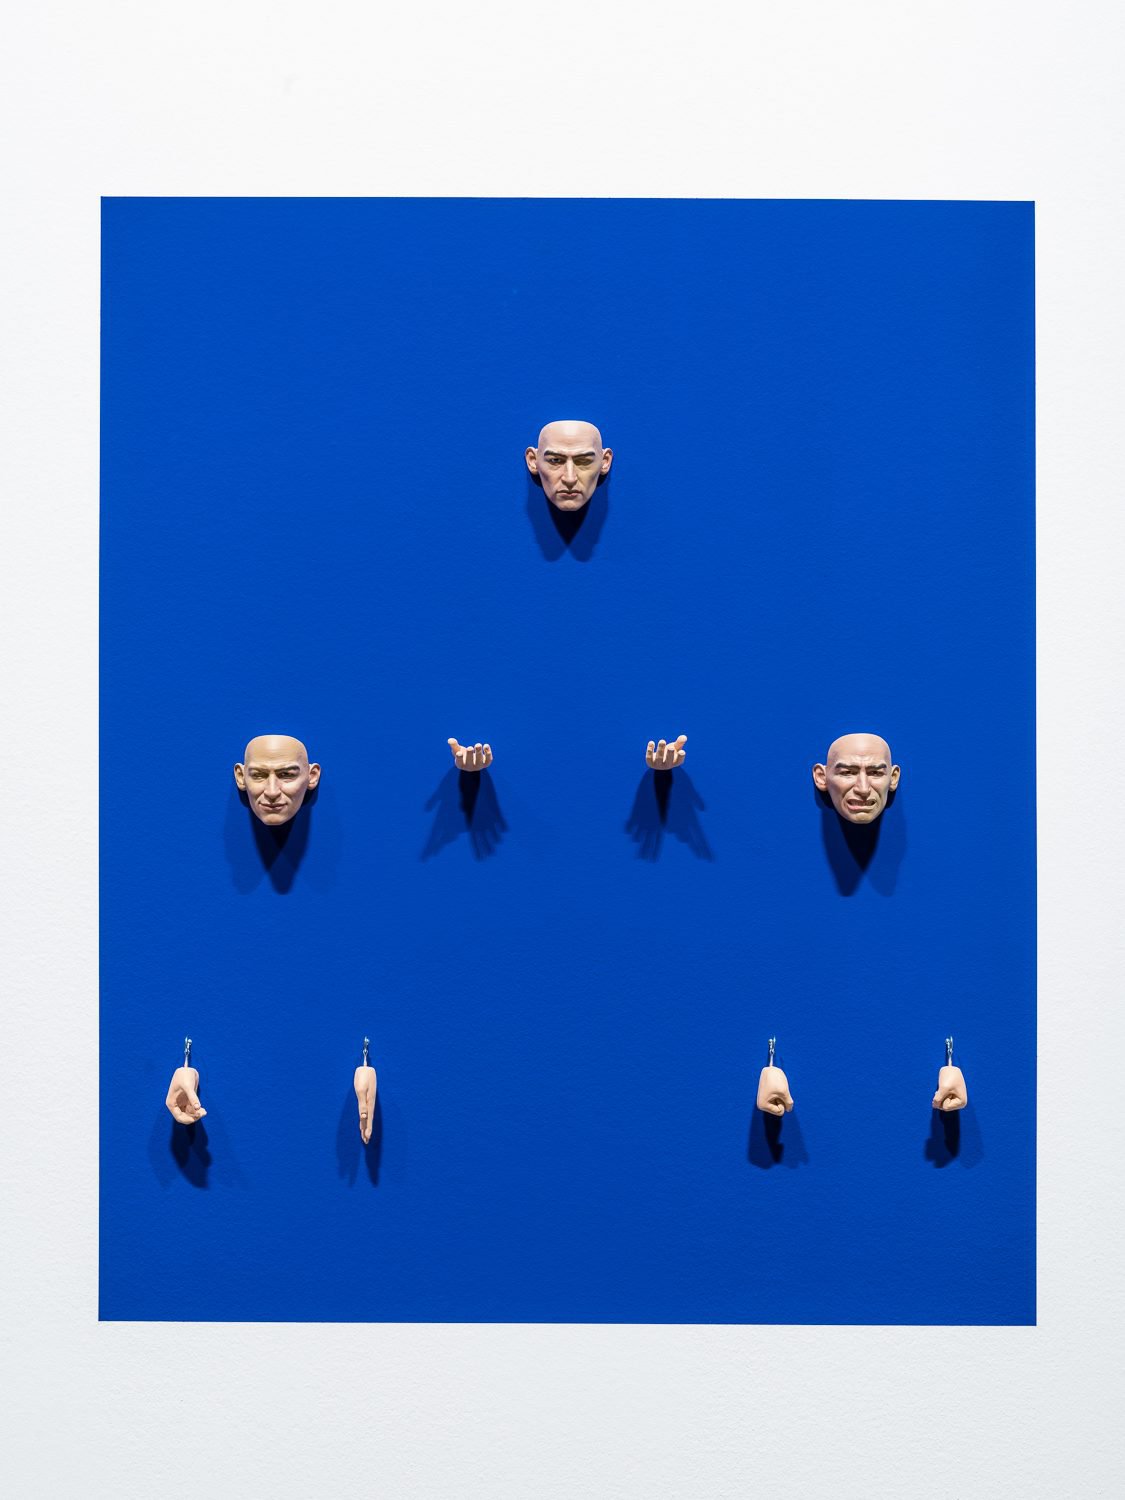 Cécile B. EvansA man in progress, 2017Hand-carved clay and wood hands, 3D sculpted and printed, hand painted resin masks, hooks, chroma blue screen paint120 x 100 x 10 cm